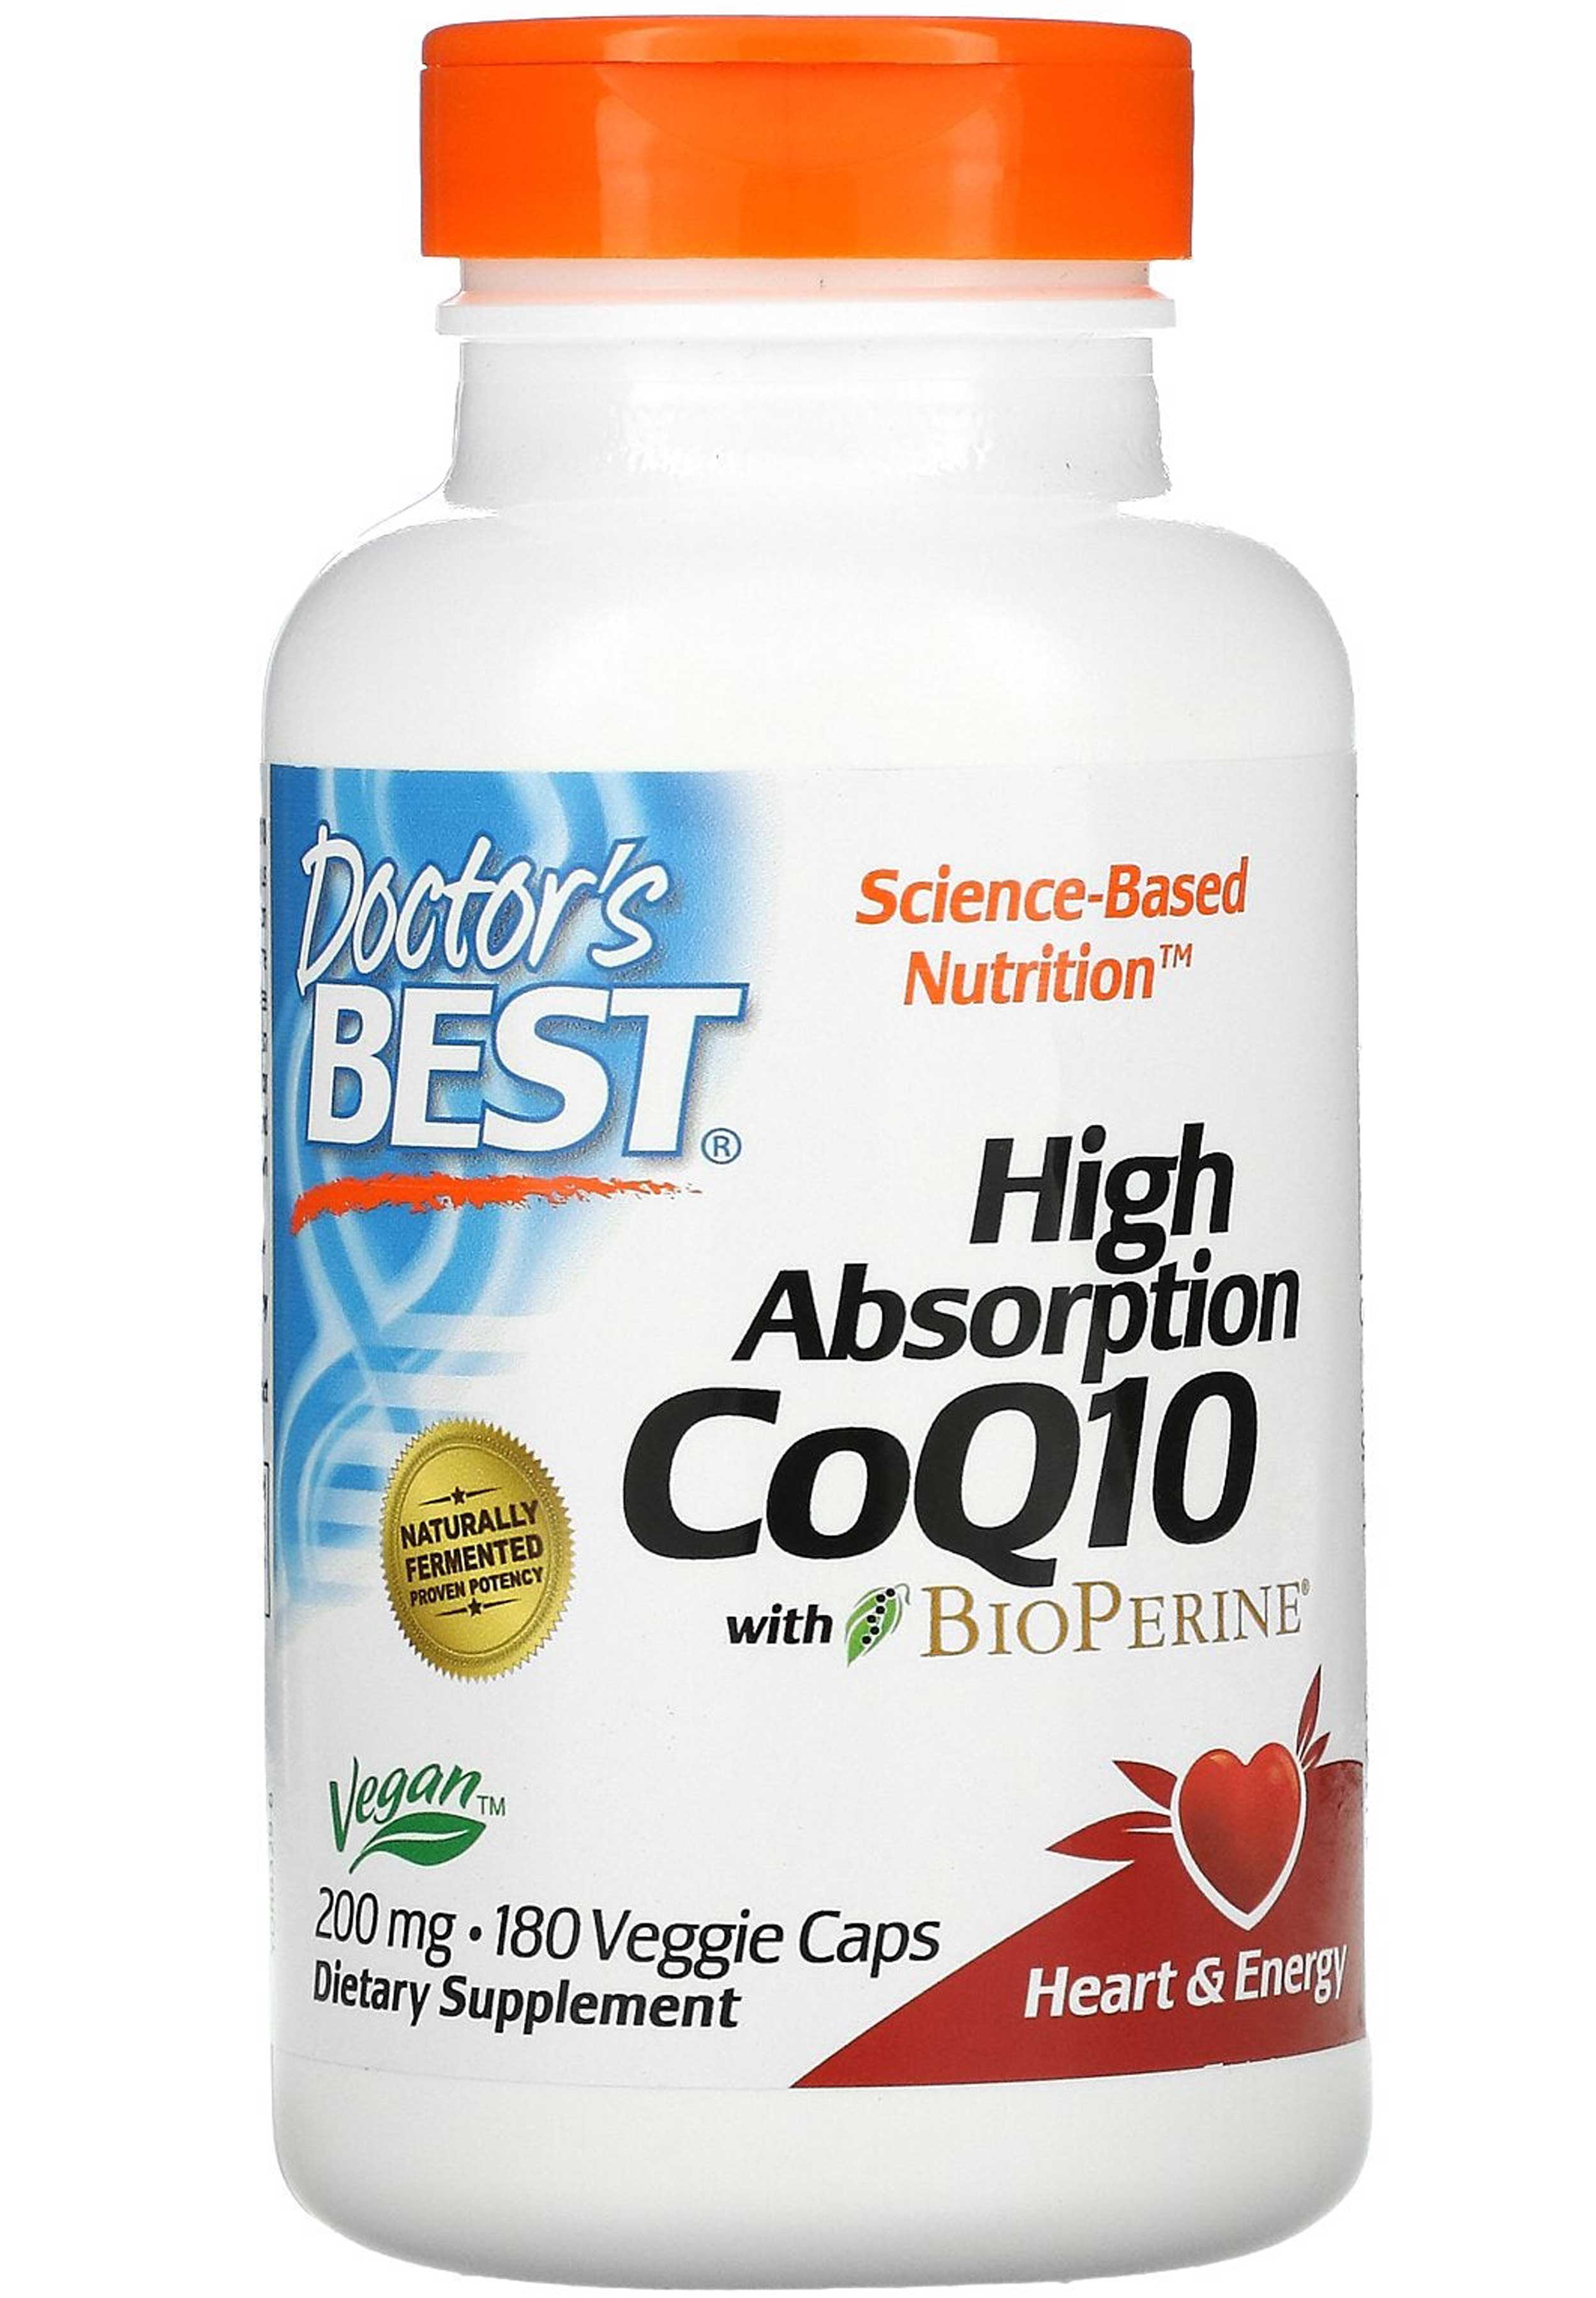 Doctor's Best High Absorption CoQ10 with BioPerine 200 mg (Veggie Capsules)